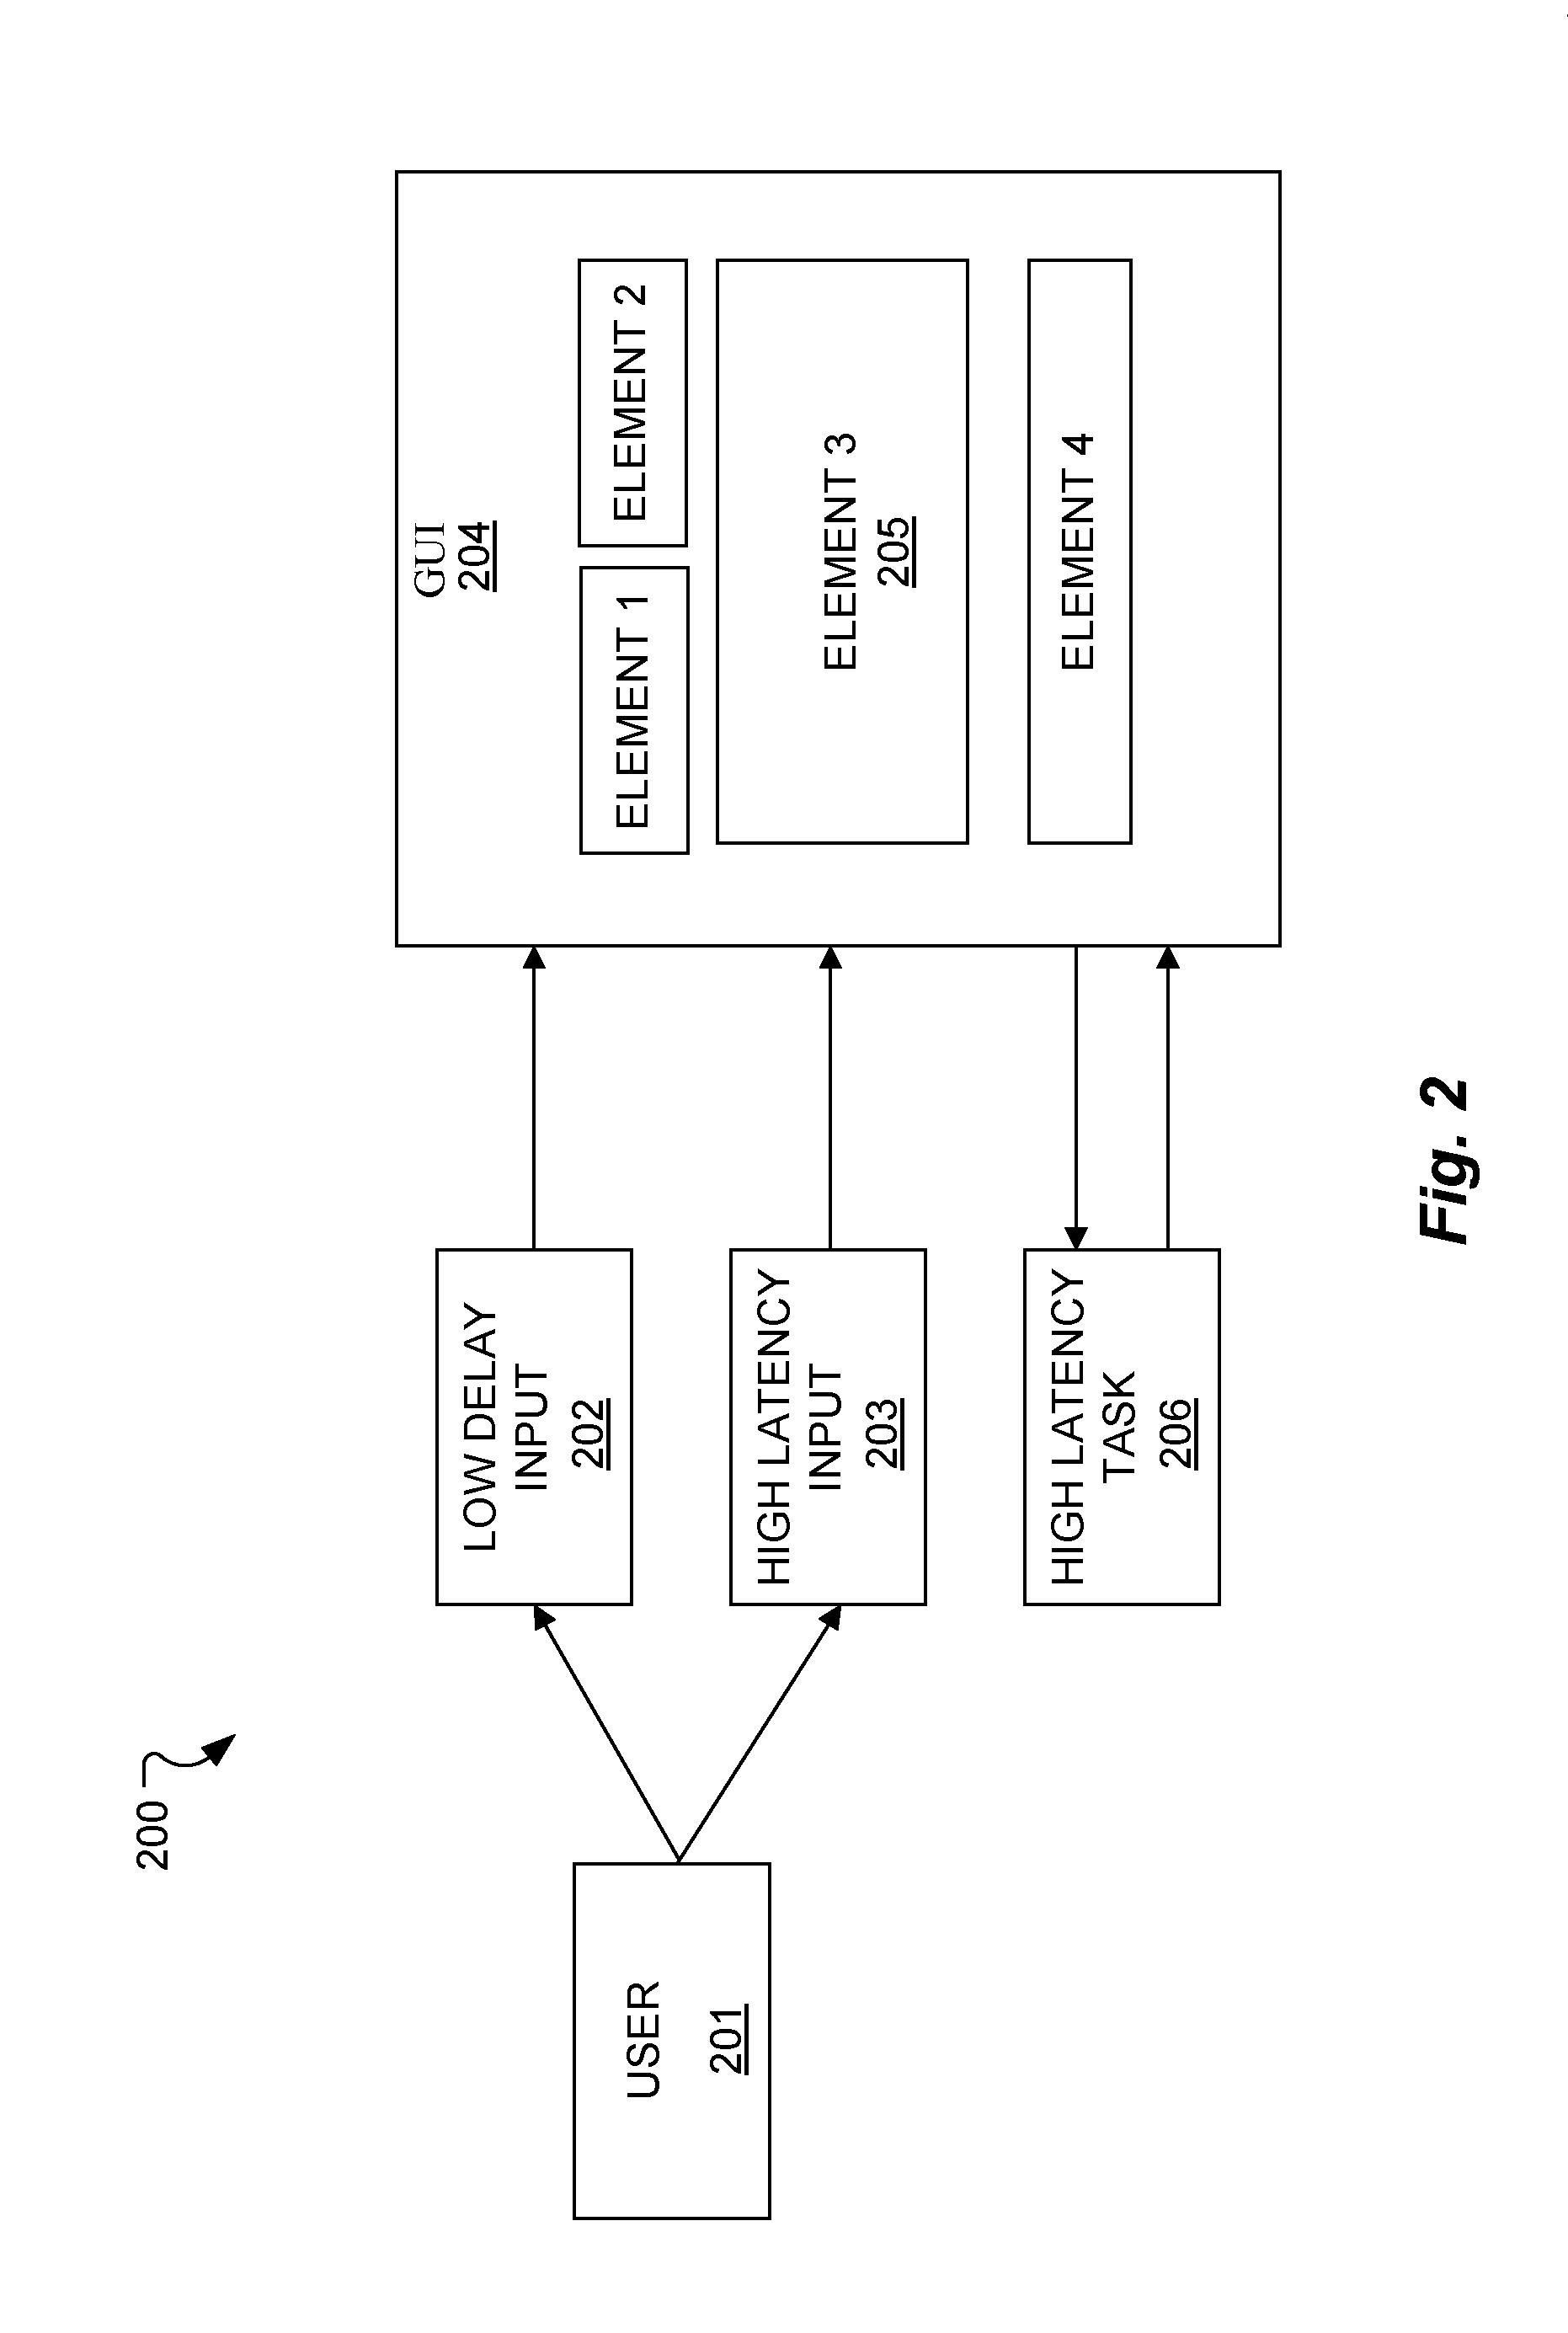 Increased User Interface Responsiveness for System with Multi-Modal Input and High Response Latencies